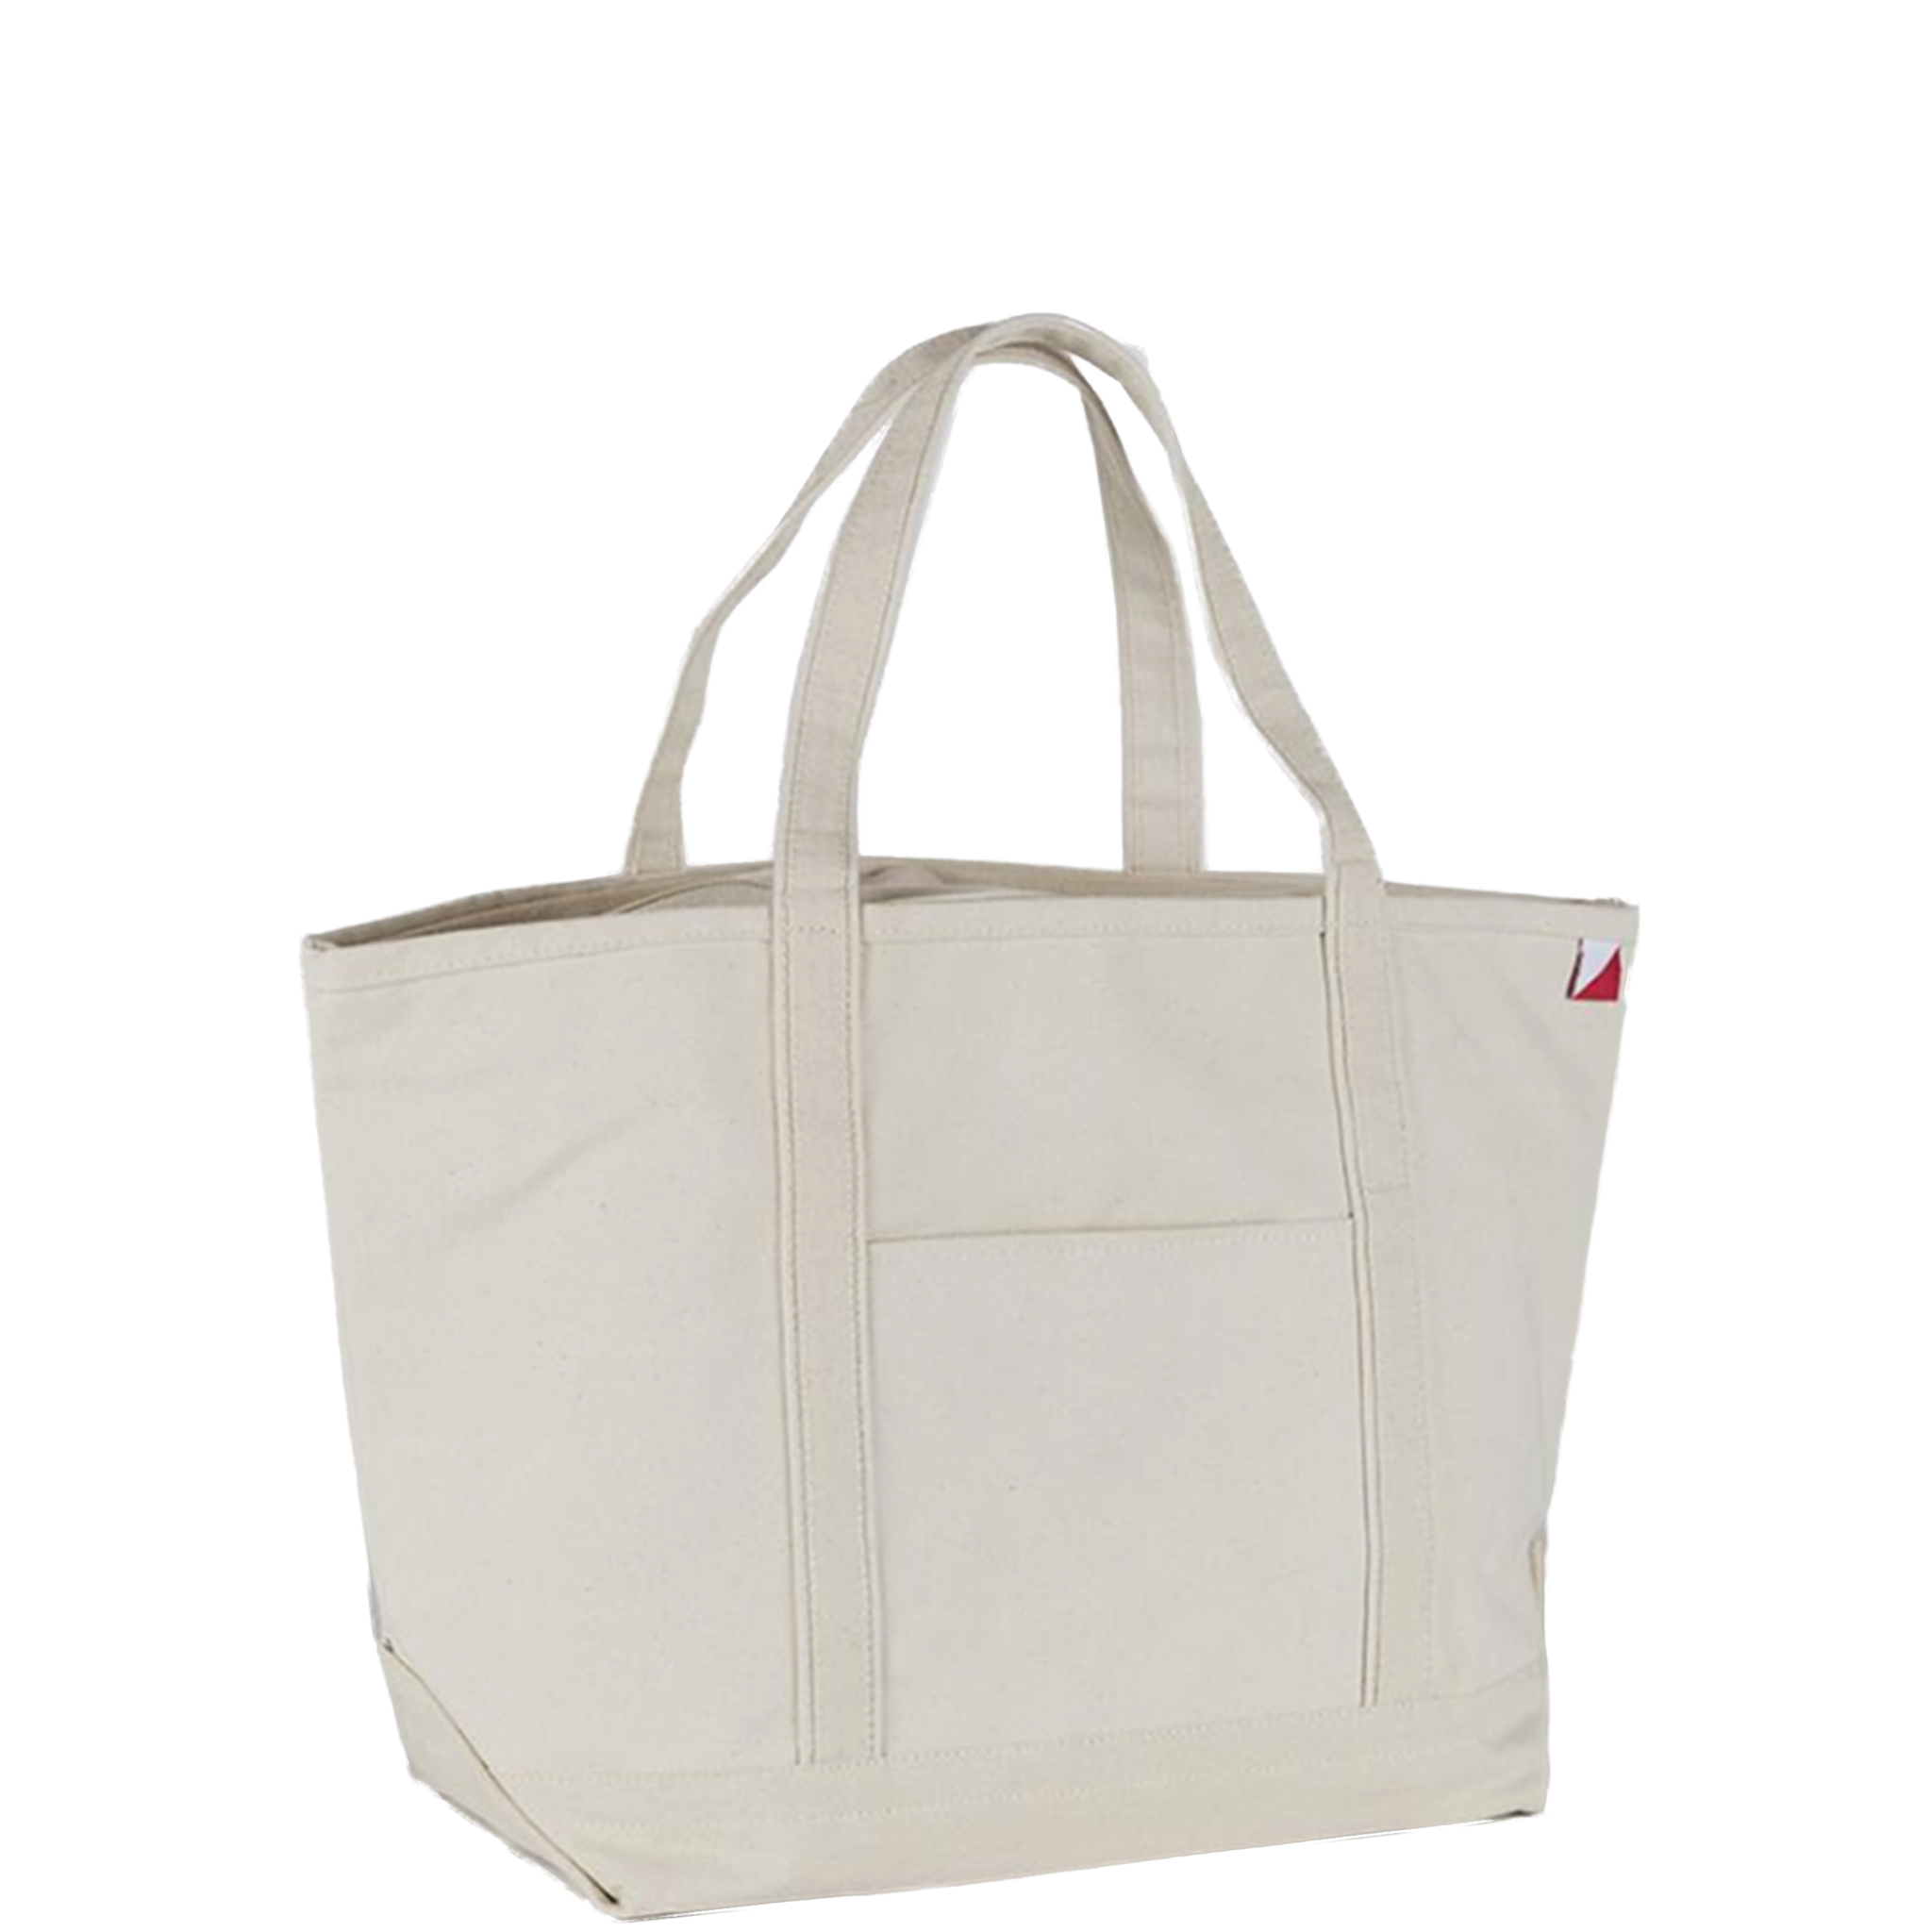 Boat Tote - Large